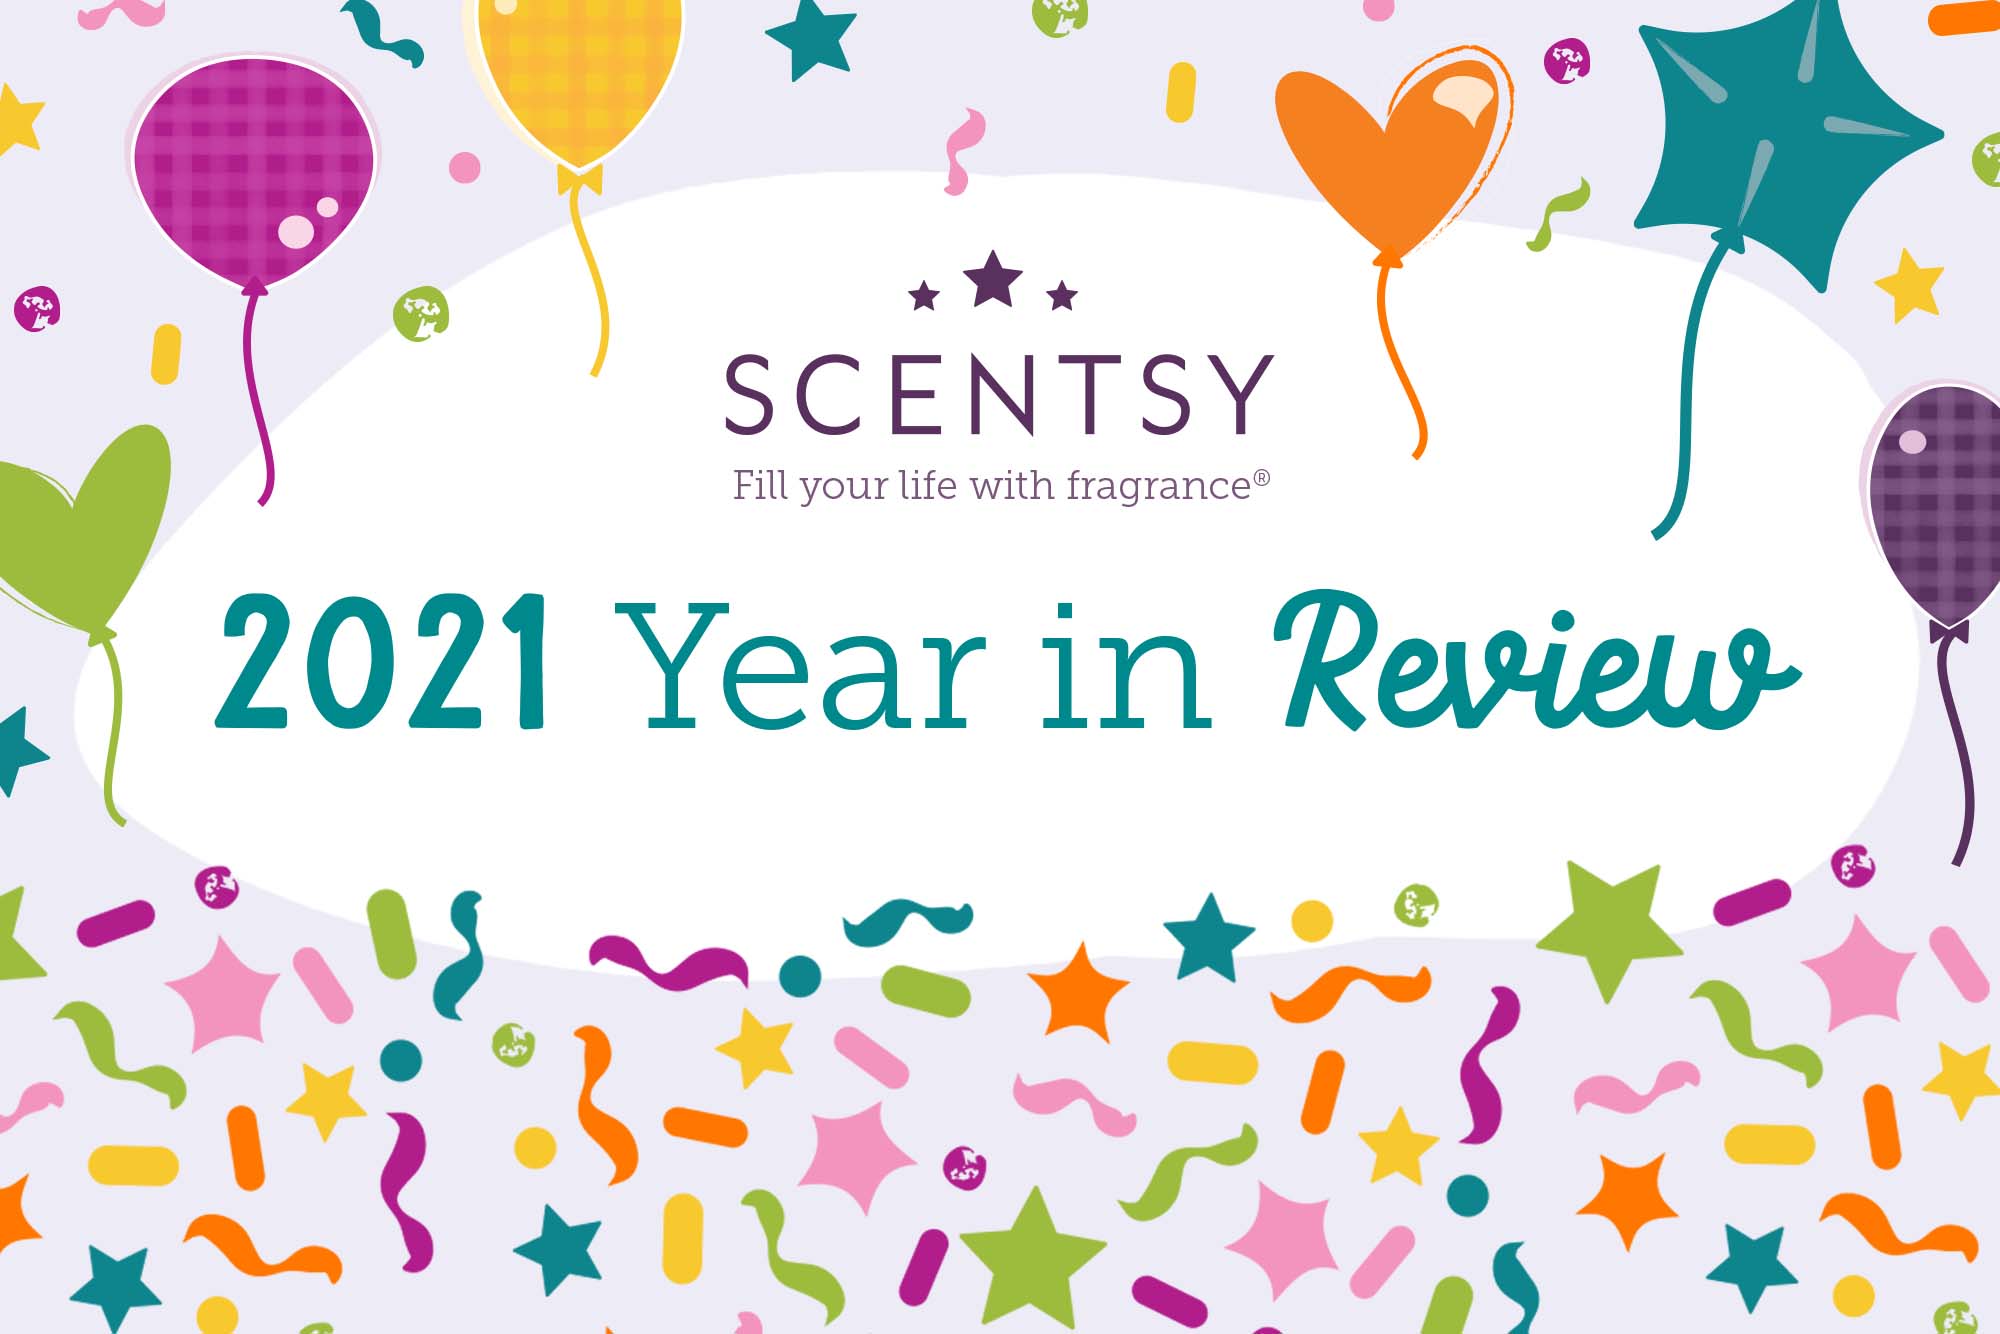 Scentsy 2021 Year in Review graphic